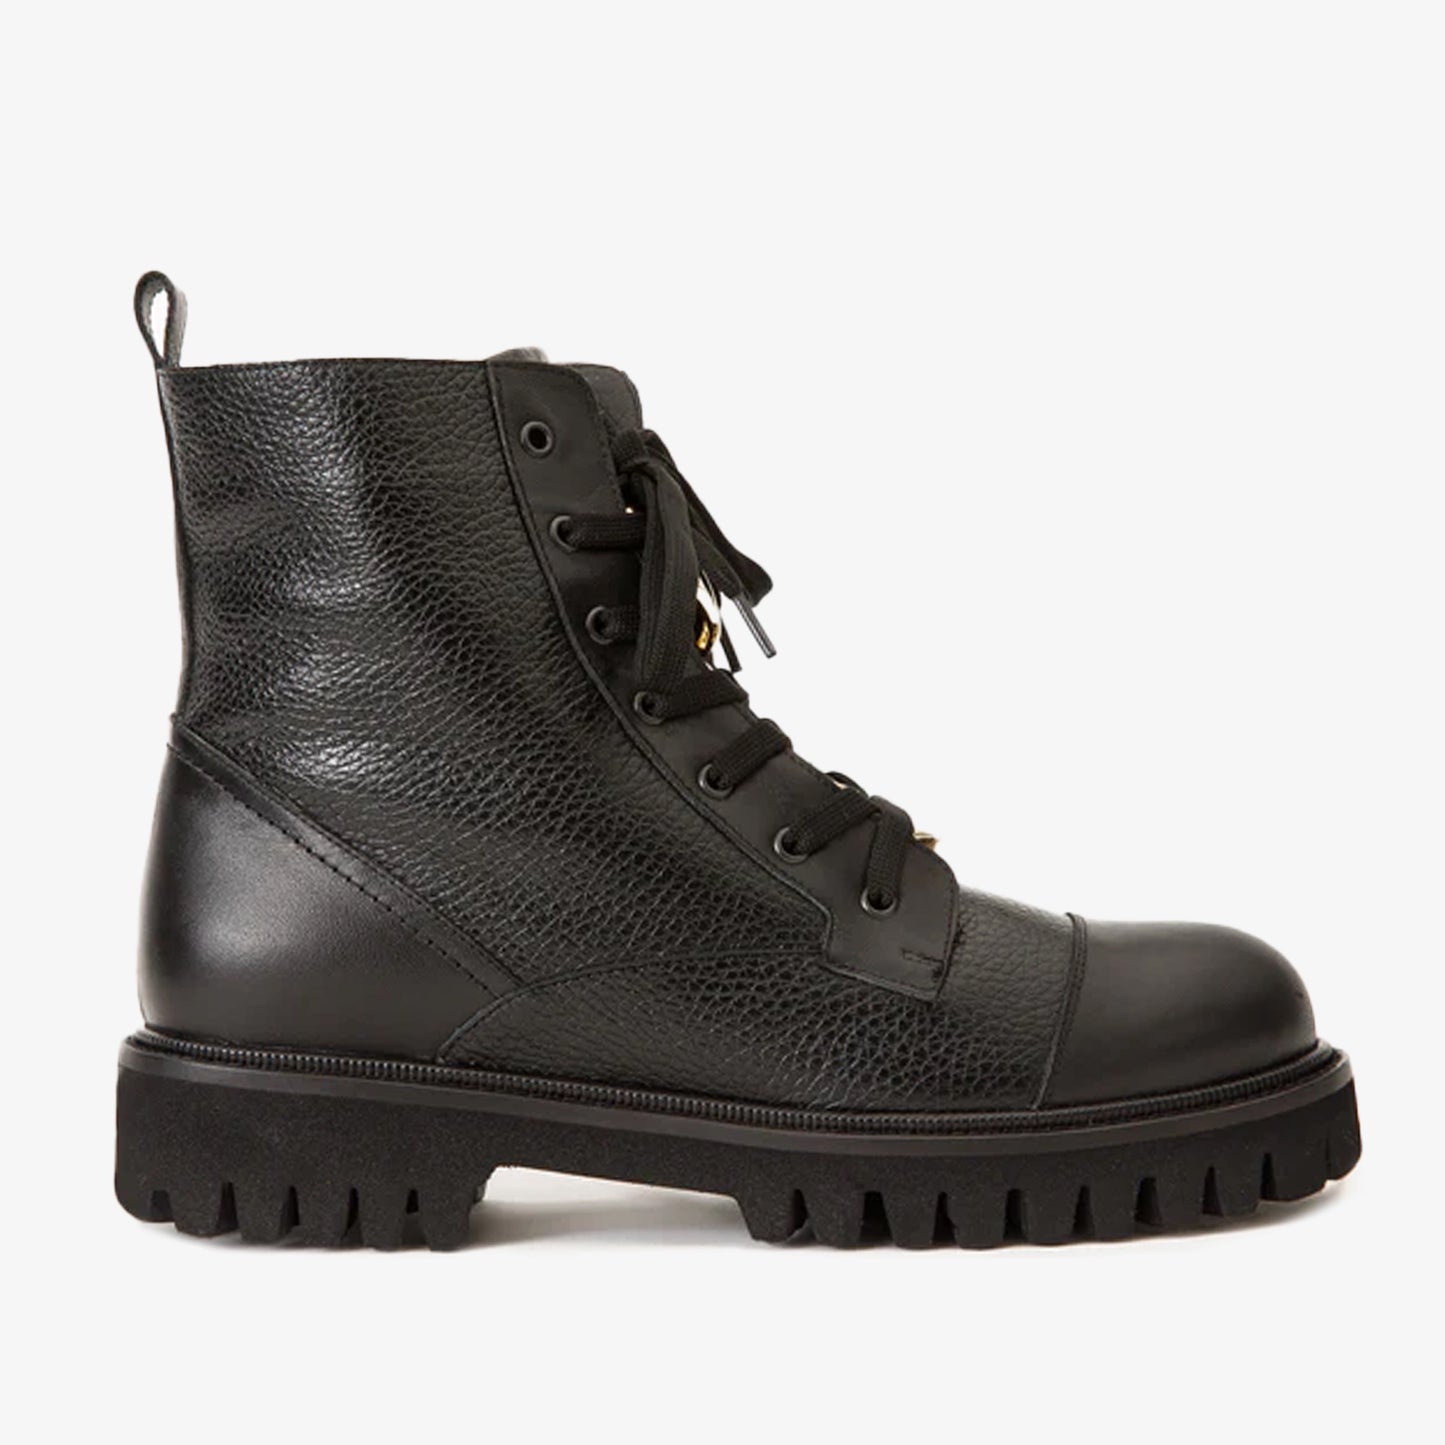 The Belgrad Black Leather Lace-Up Ankle Women Boot With a Side Zipper